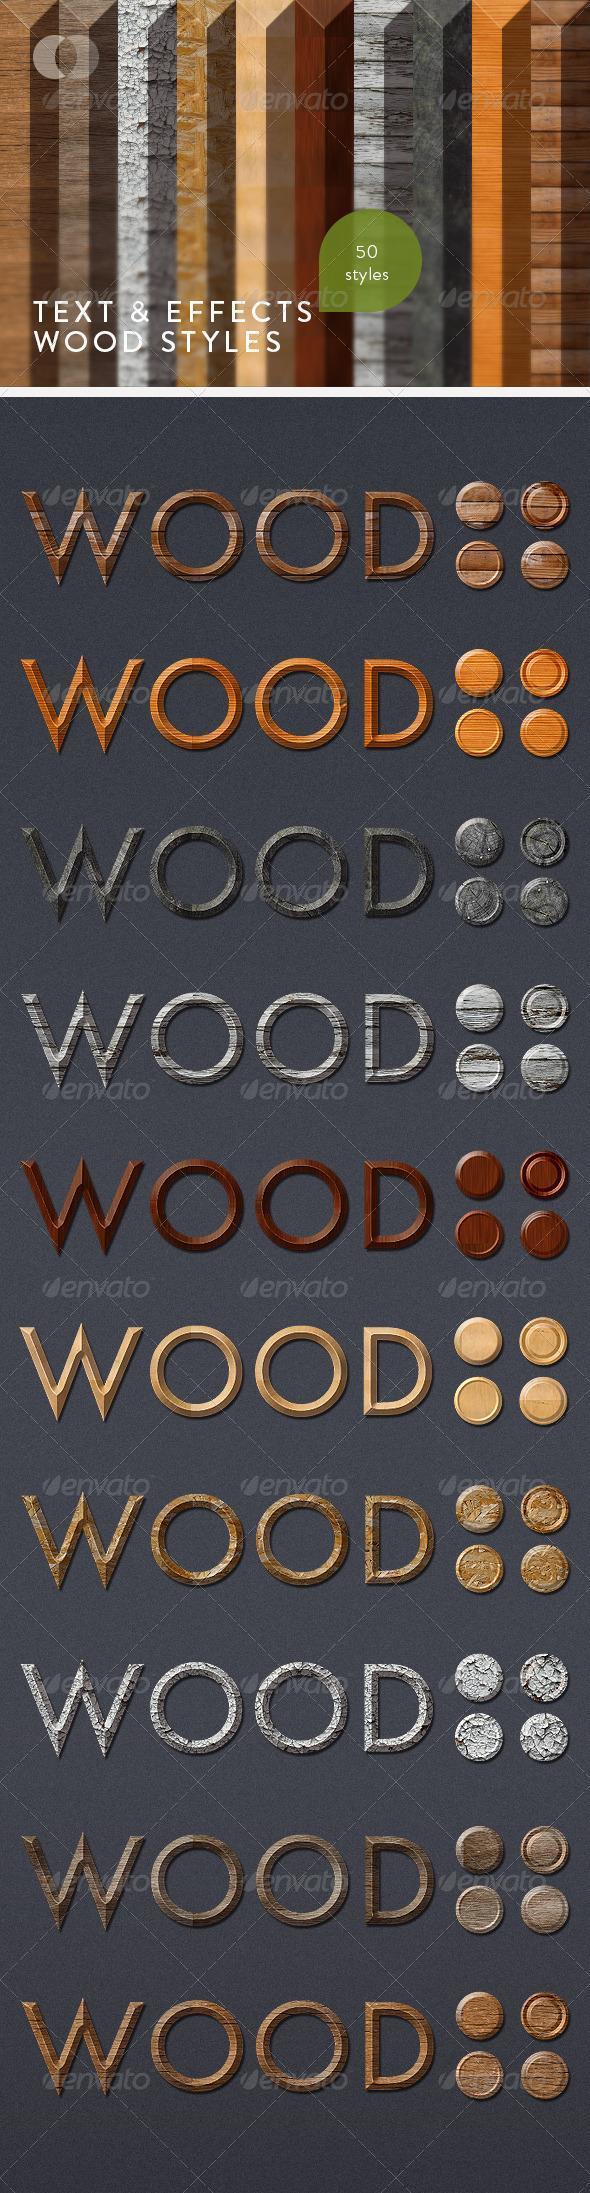 Different Wood Text Effects for Photoshop